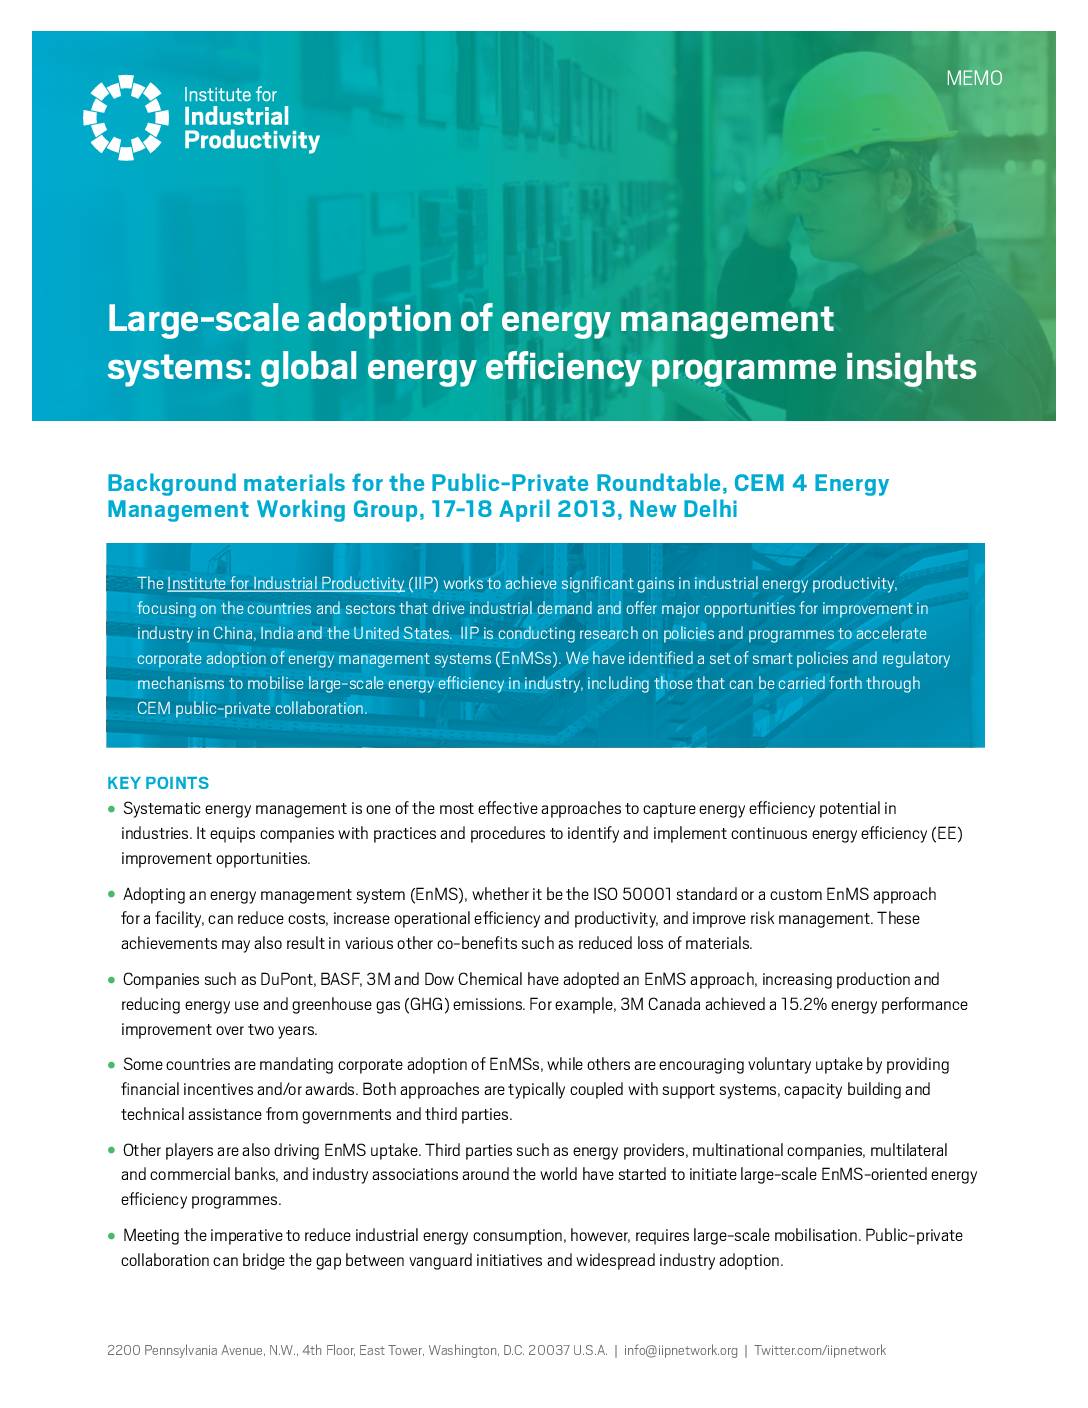 Large-scale adoption of energy management systems: global energy efficiency programme insight